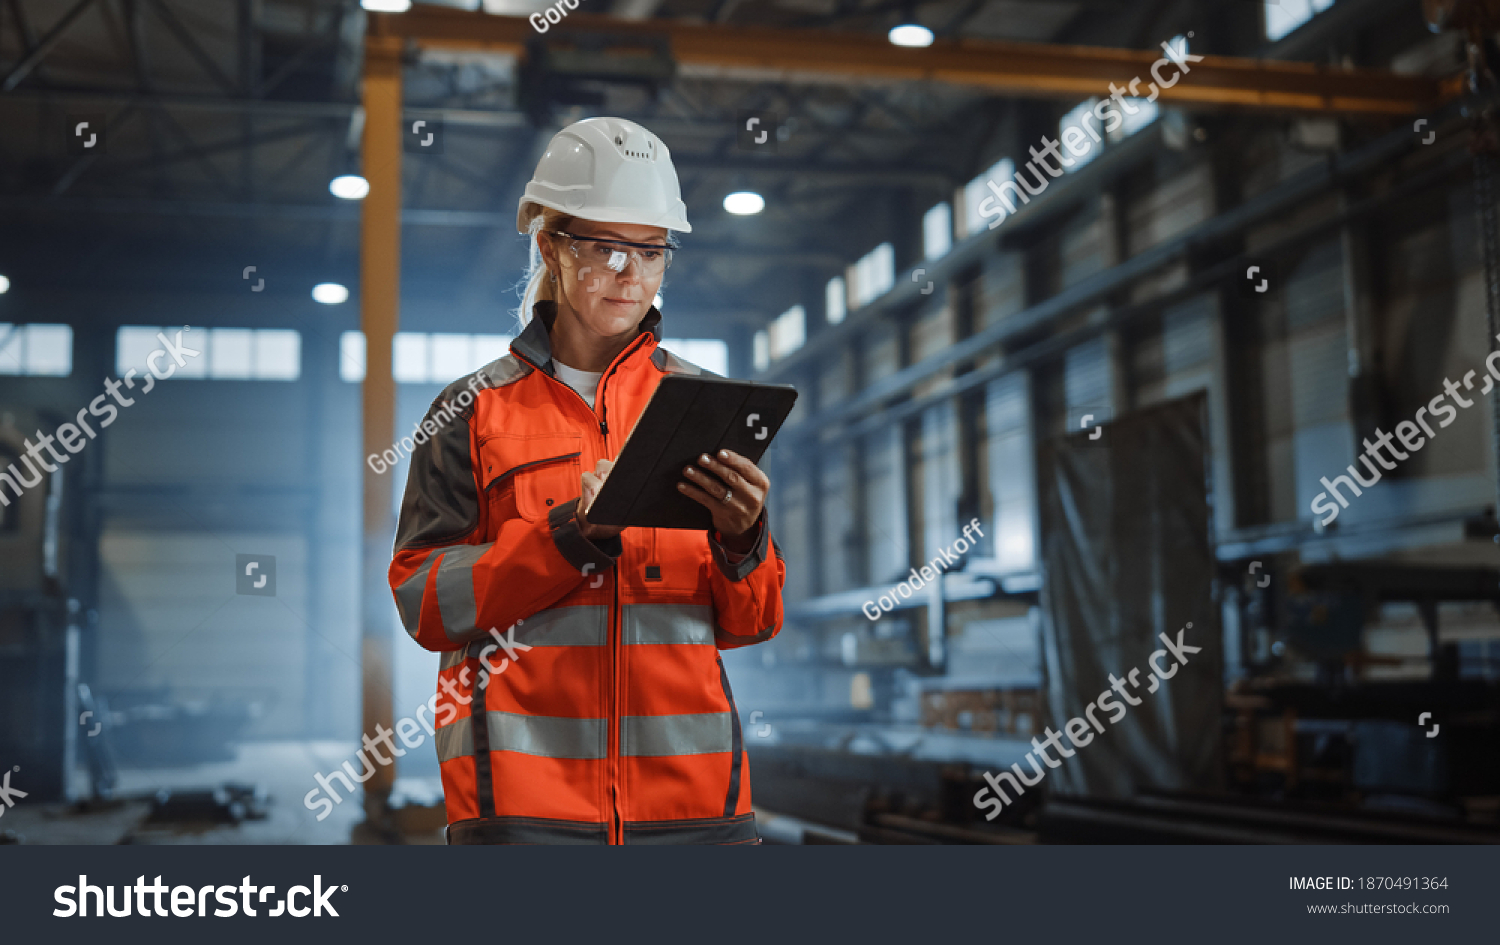 Professional Heavy Industry Engineer Worker Wearing Safety Uniform and Hard Hat, Using Tablet Computer. Serious Successful Female Industrial Specialist Walking in a Metal Manufacture Warehouse. #1870491364